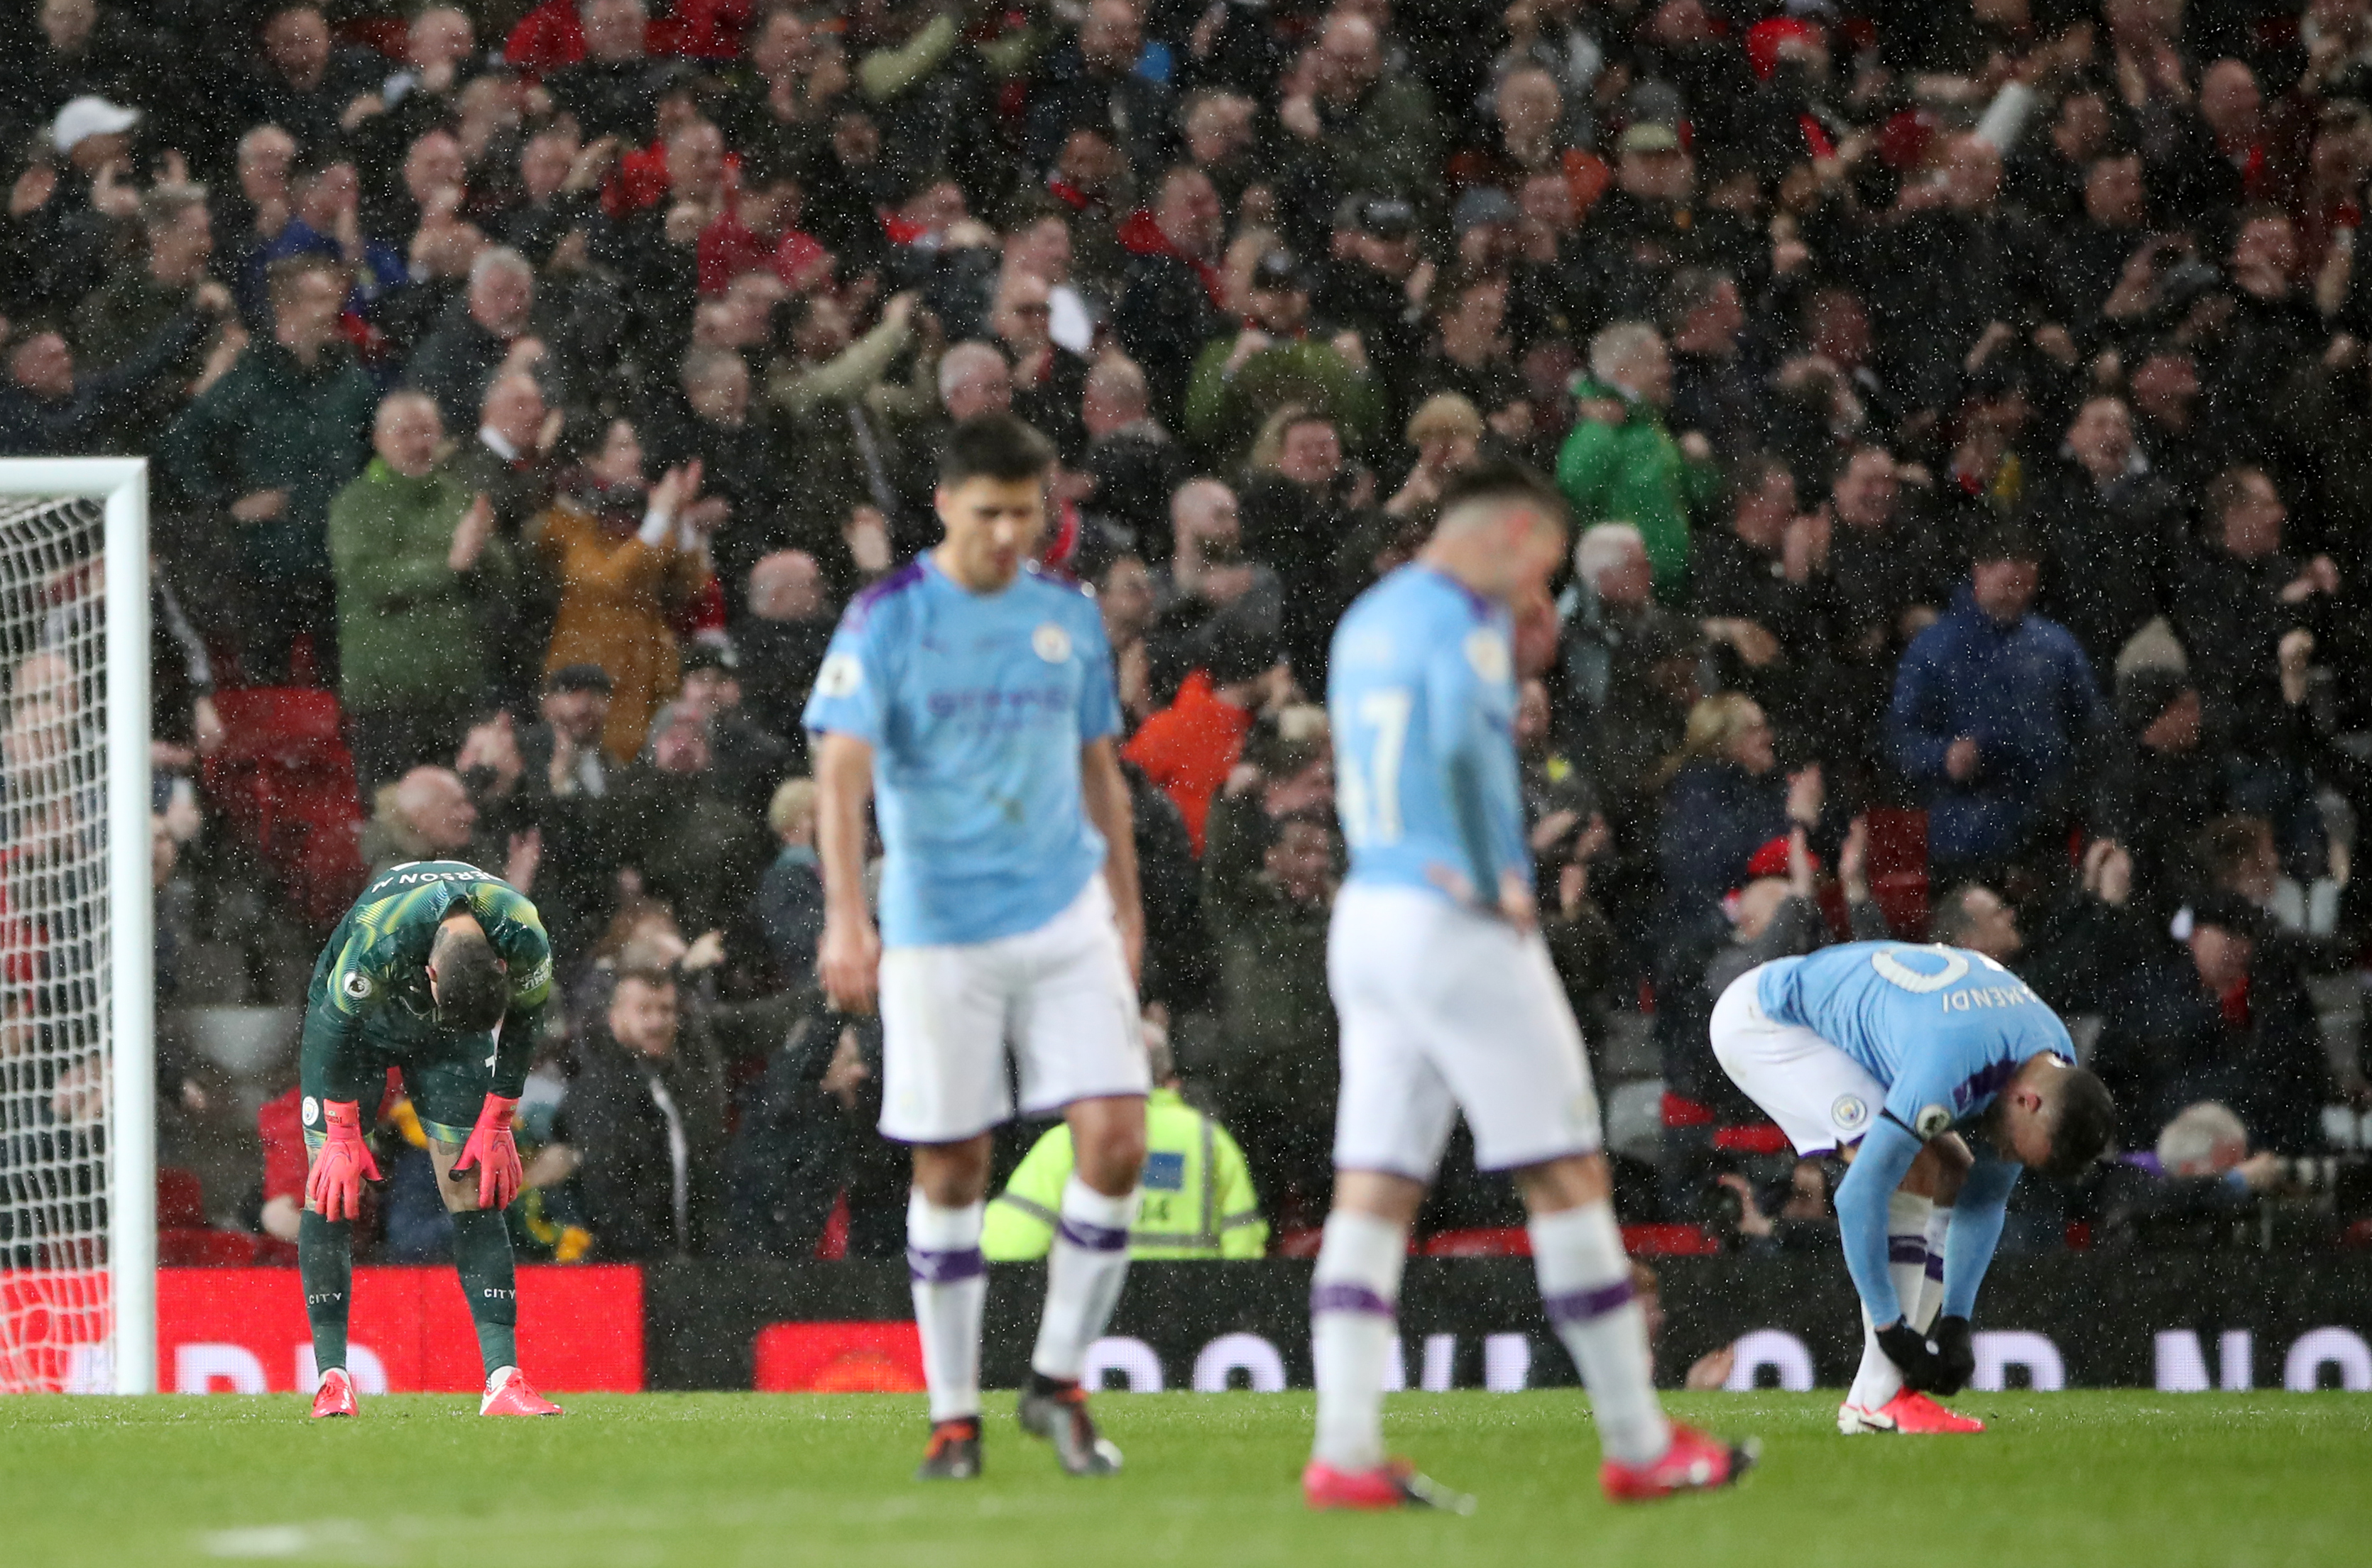 City's last game before football stopped was their loss to local rivals Manchester United. Image: PA Images